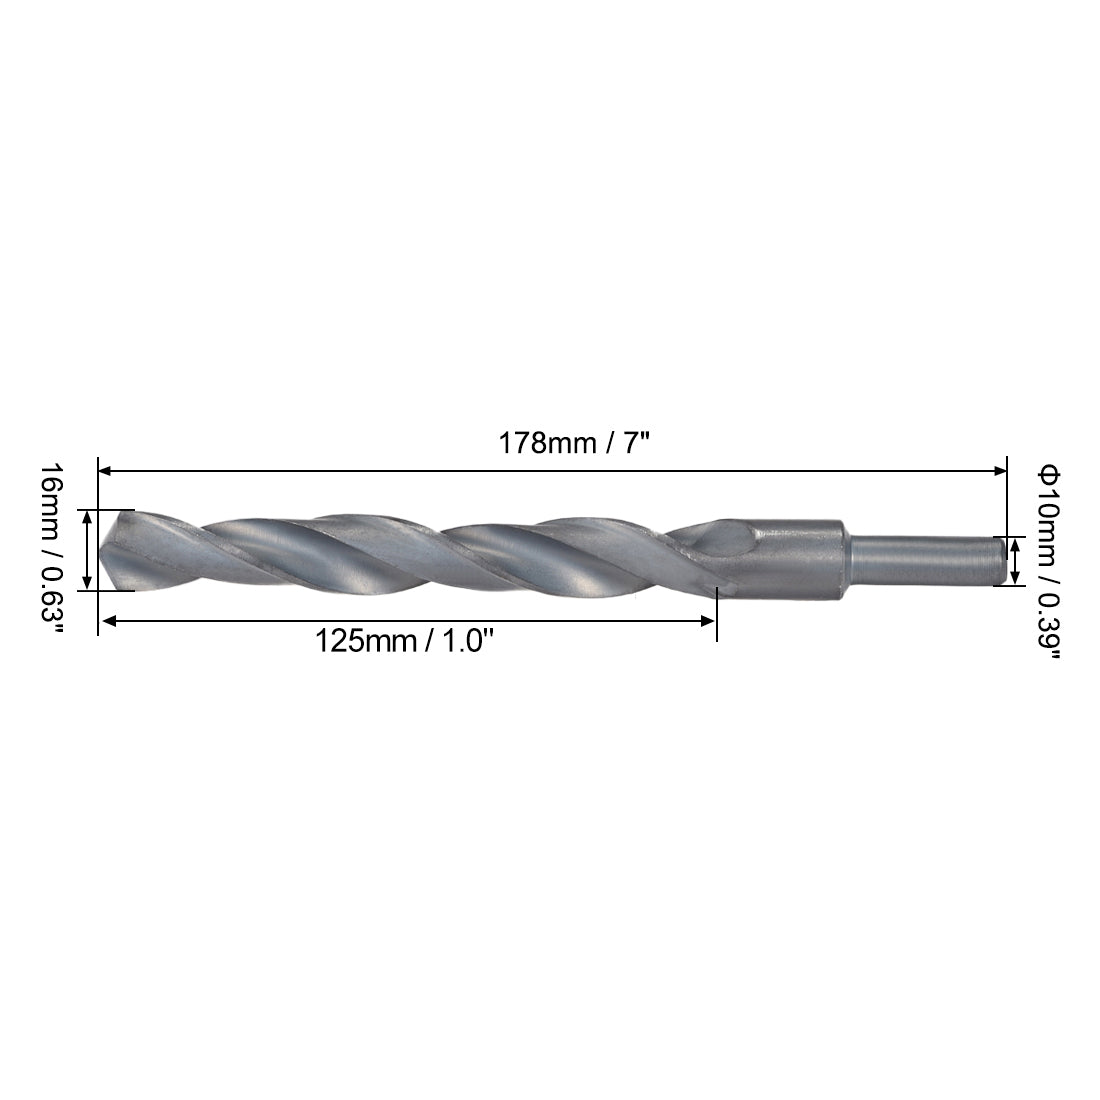 uxcell Uxcell Reduced Shank Twist Drill Bits 16mm HSS 4241 with 10mm Shank 1 Pcs